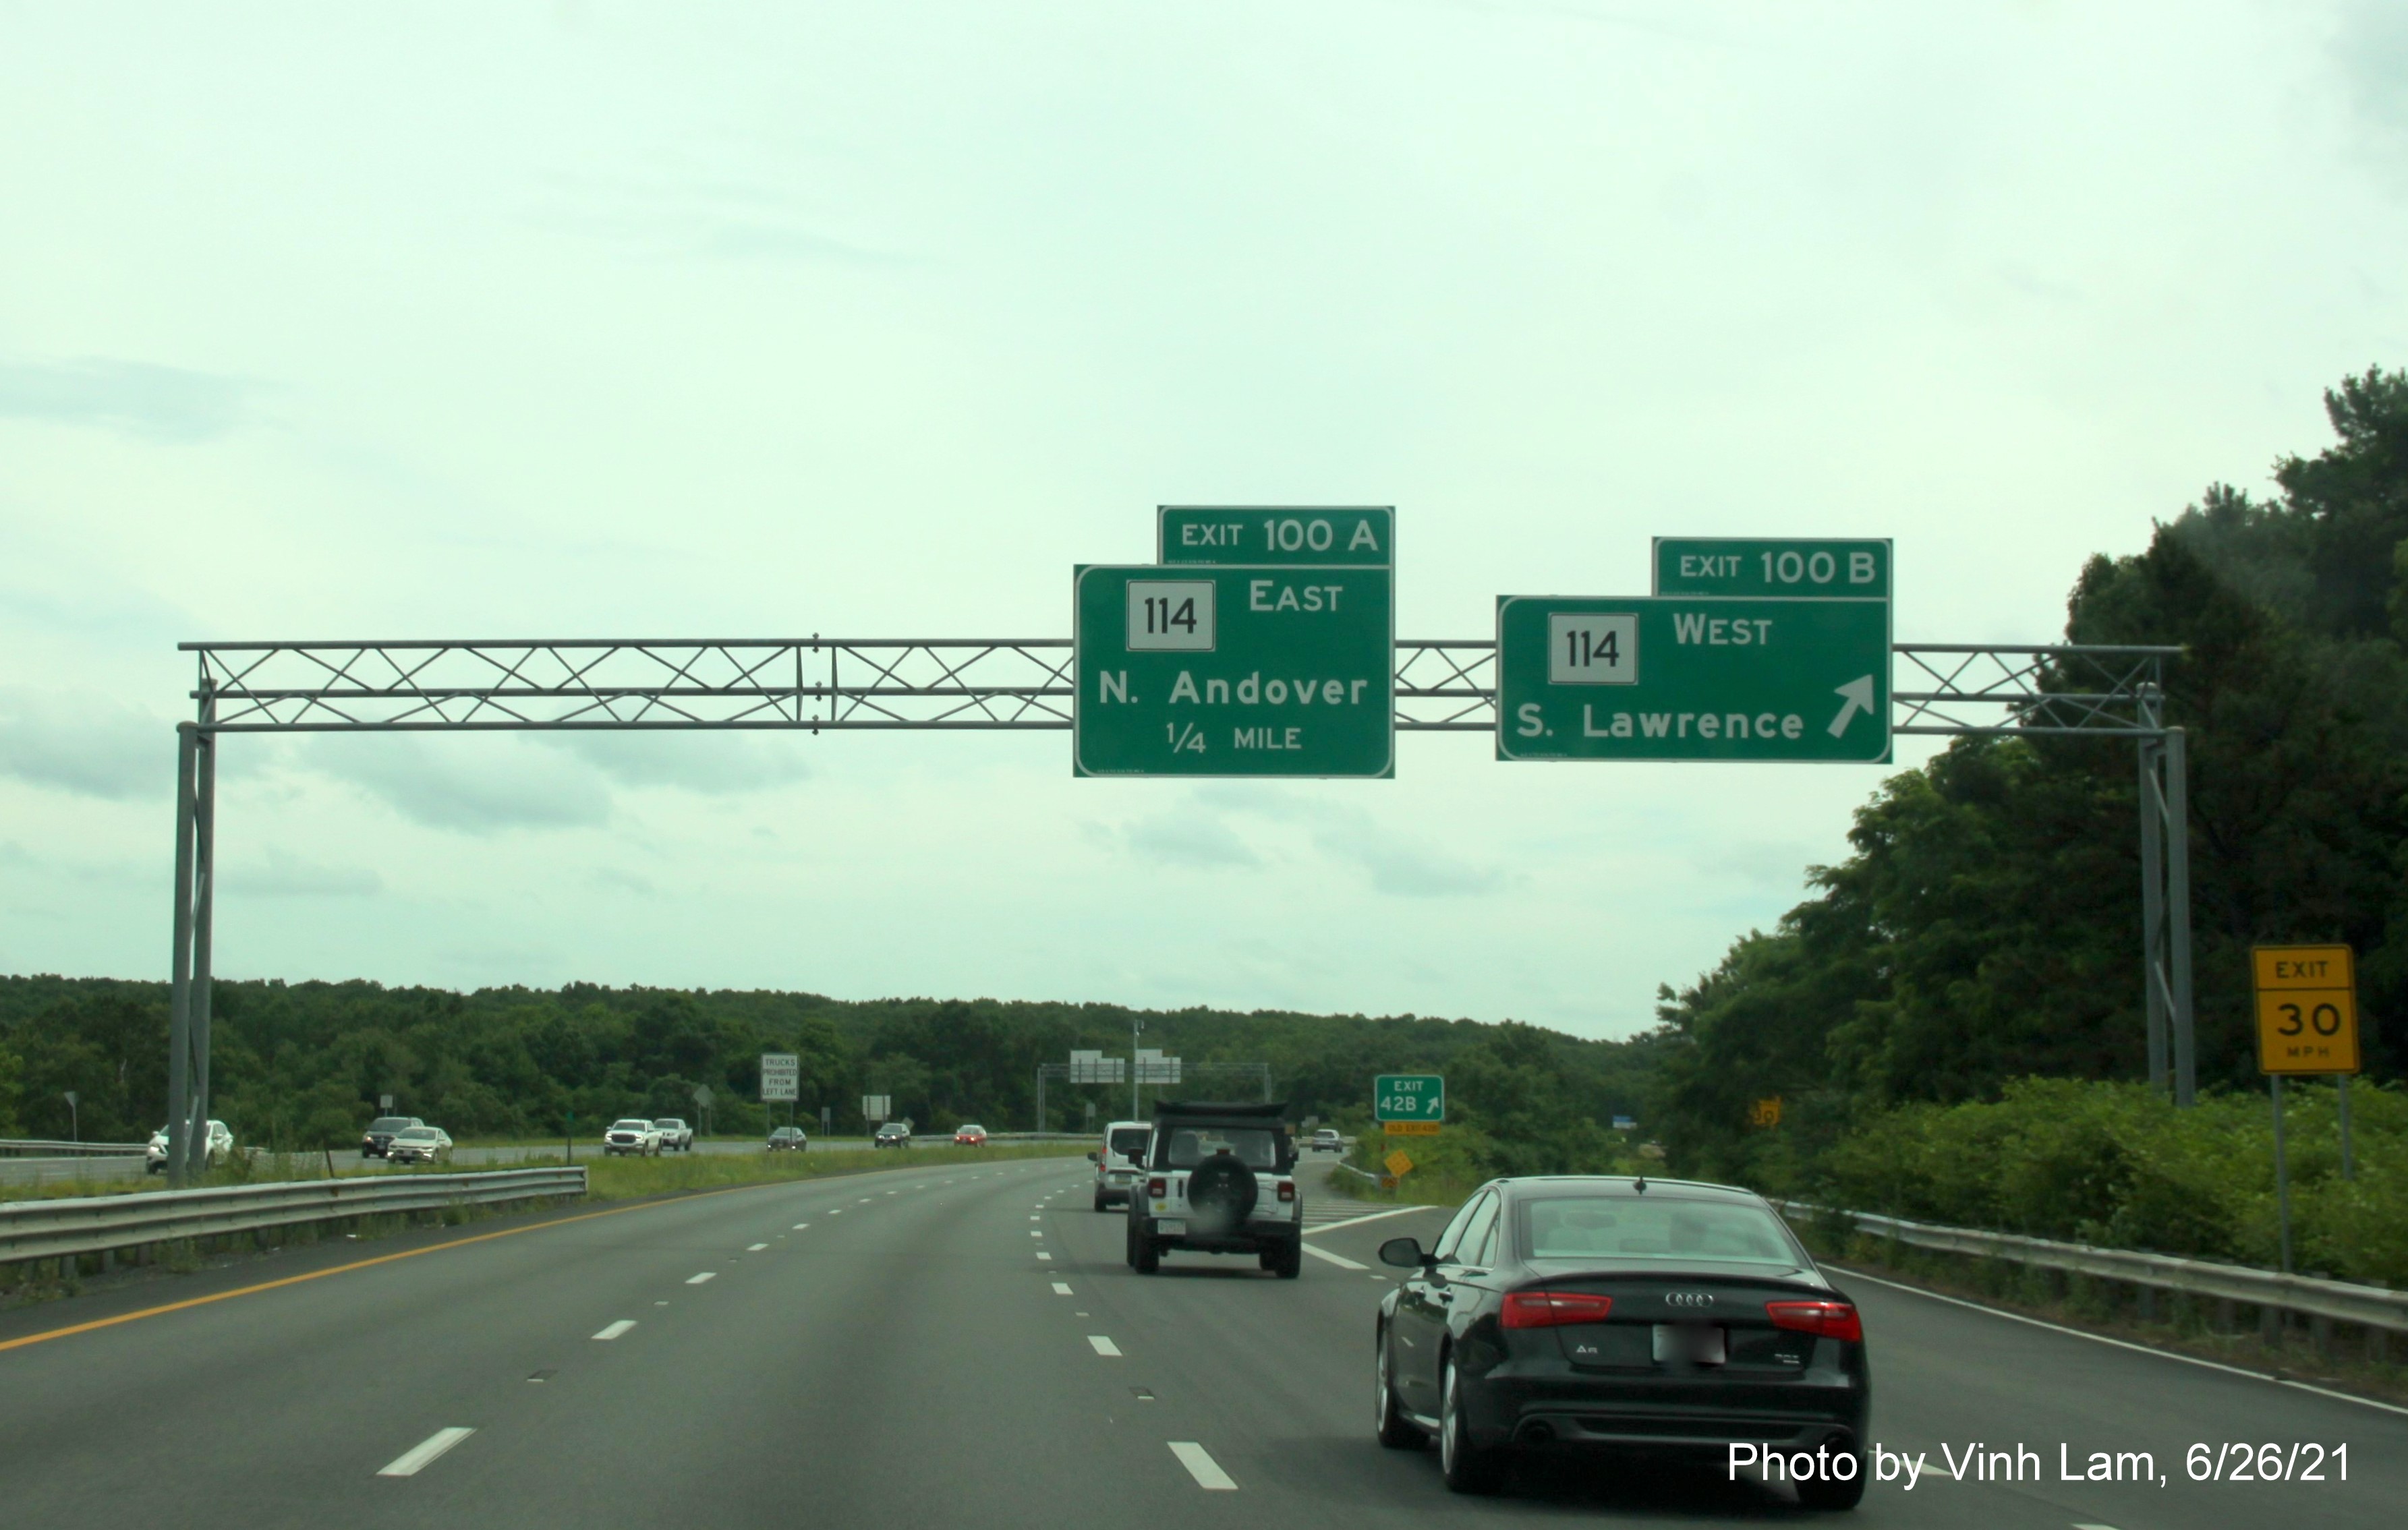 Image of overhead signage at ramp for MA 114 West exit with new milepost exit numbers on I-495 South in North Andover, by Vinh Lam, June 2021